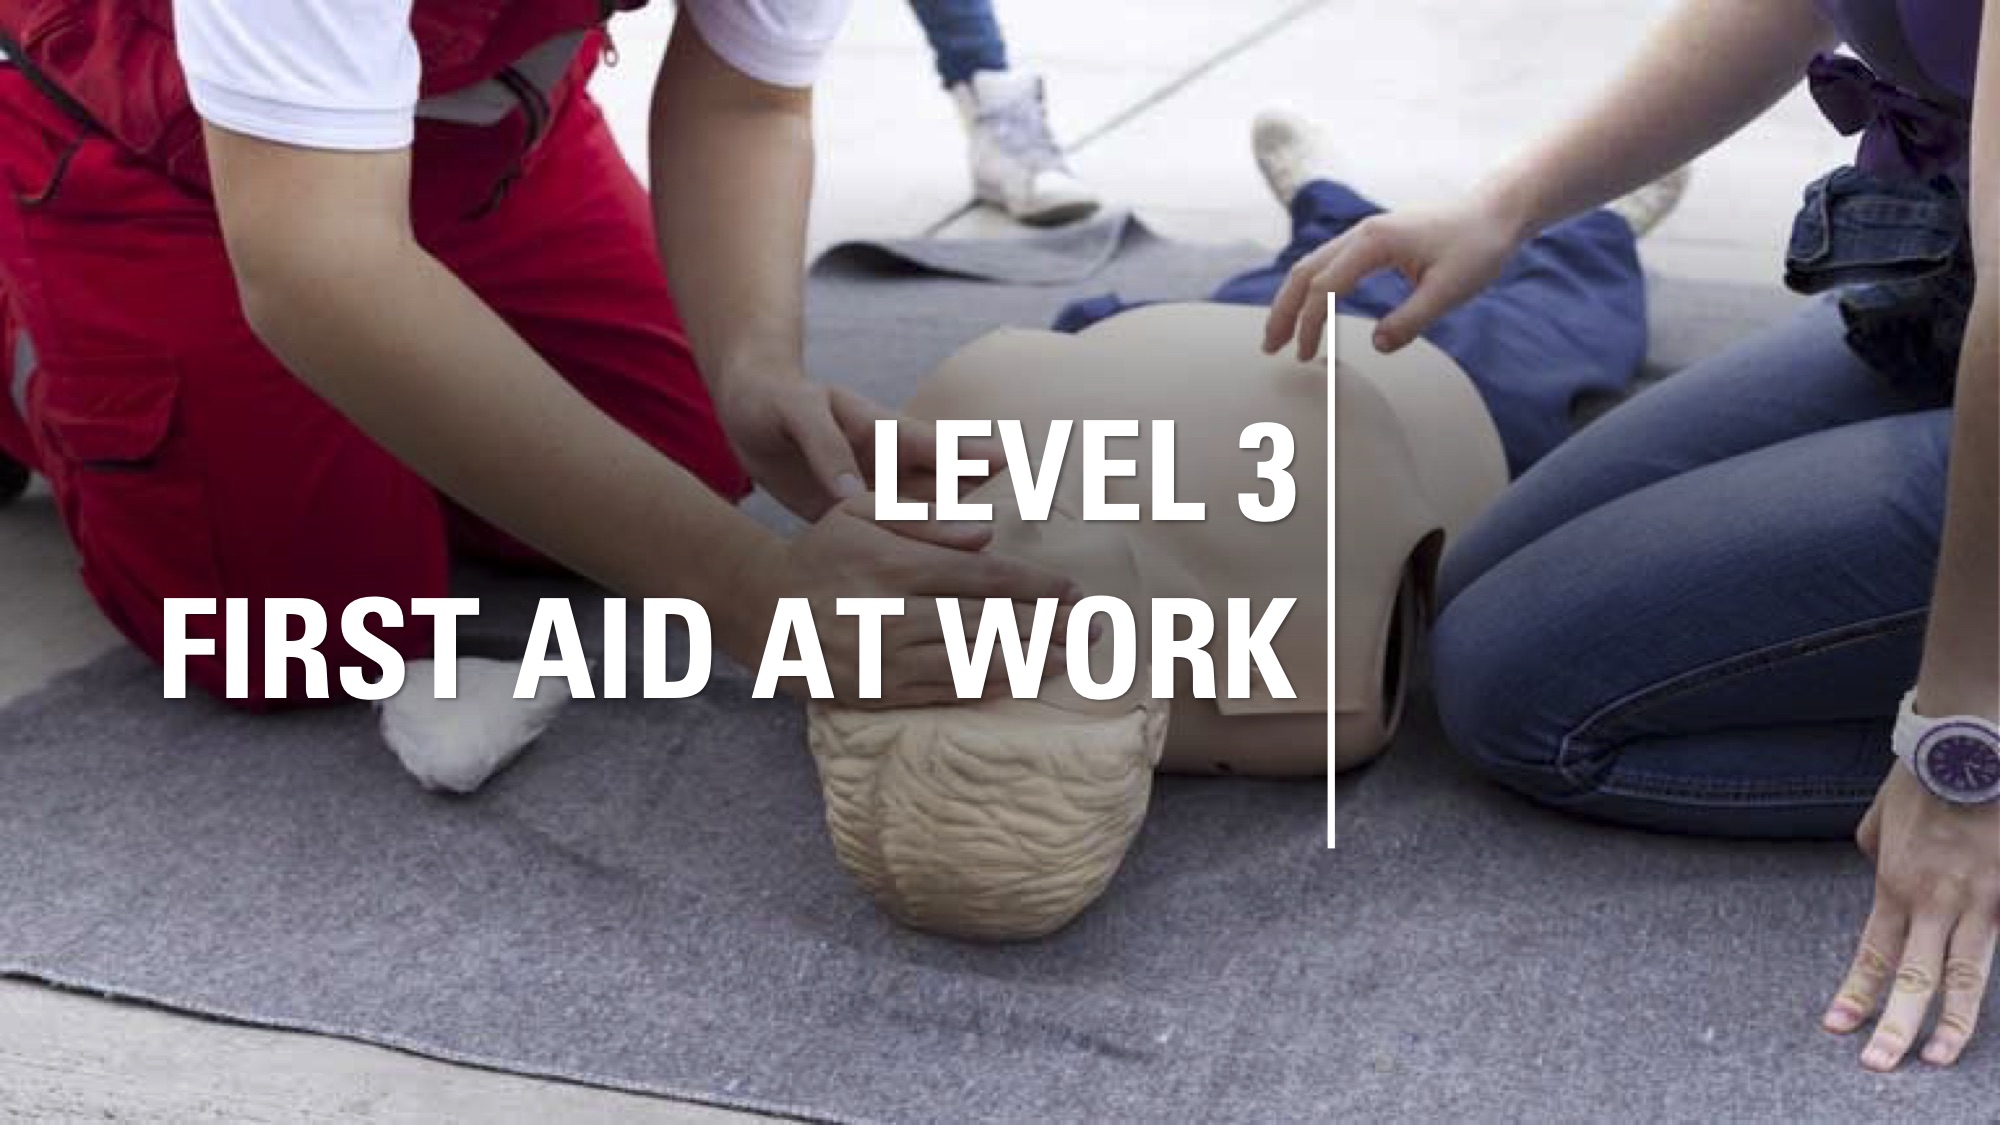 First Aid at Work training courses